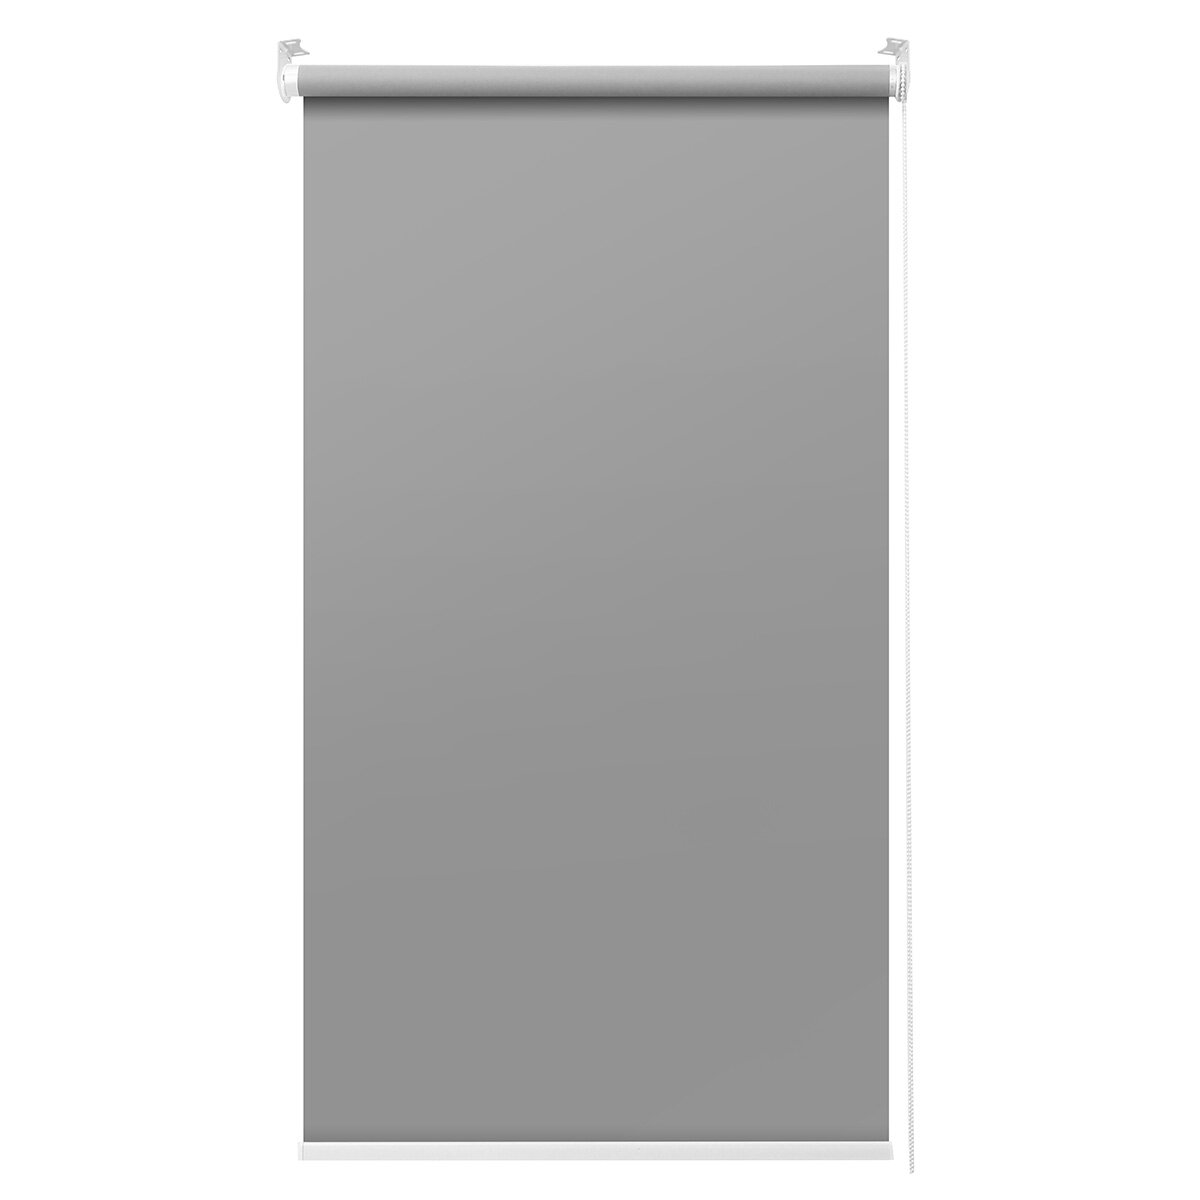 Image of Blackout Window Curtain Roller Full Shades Blind Office Home Privacy Grey/White